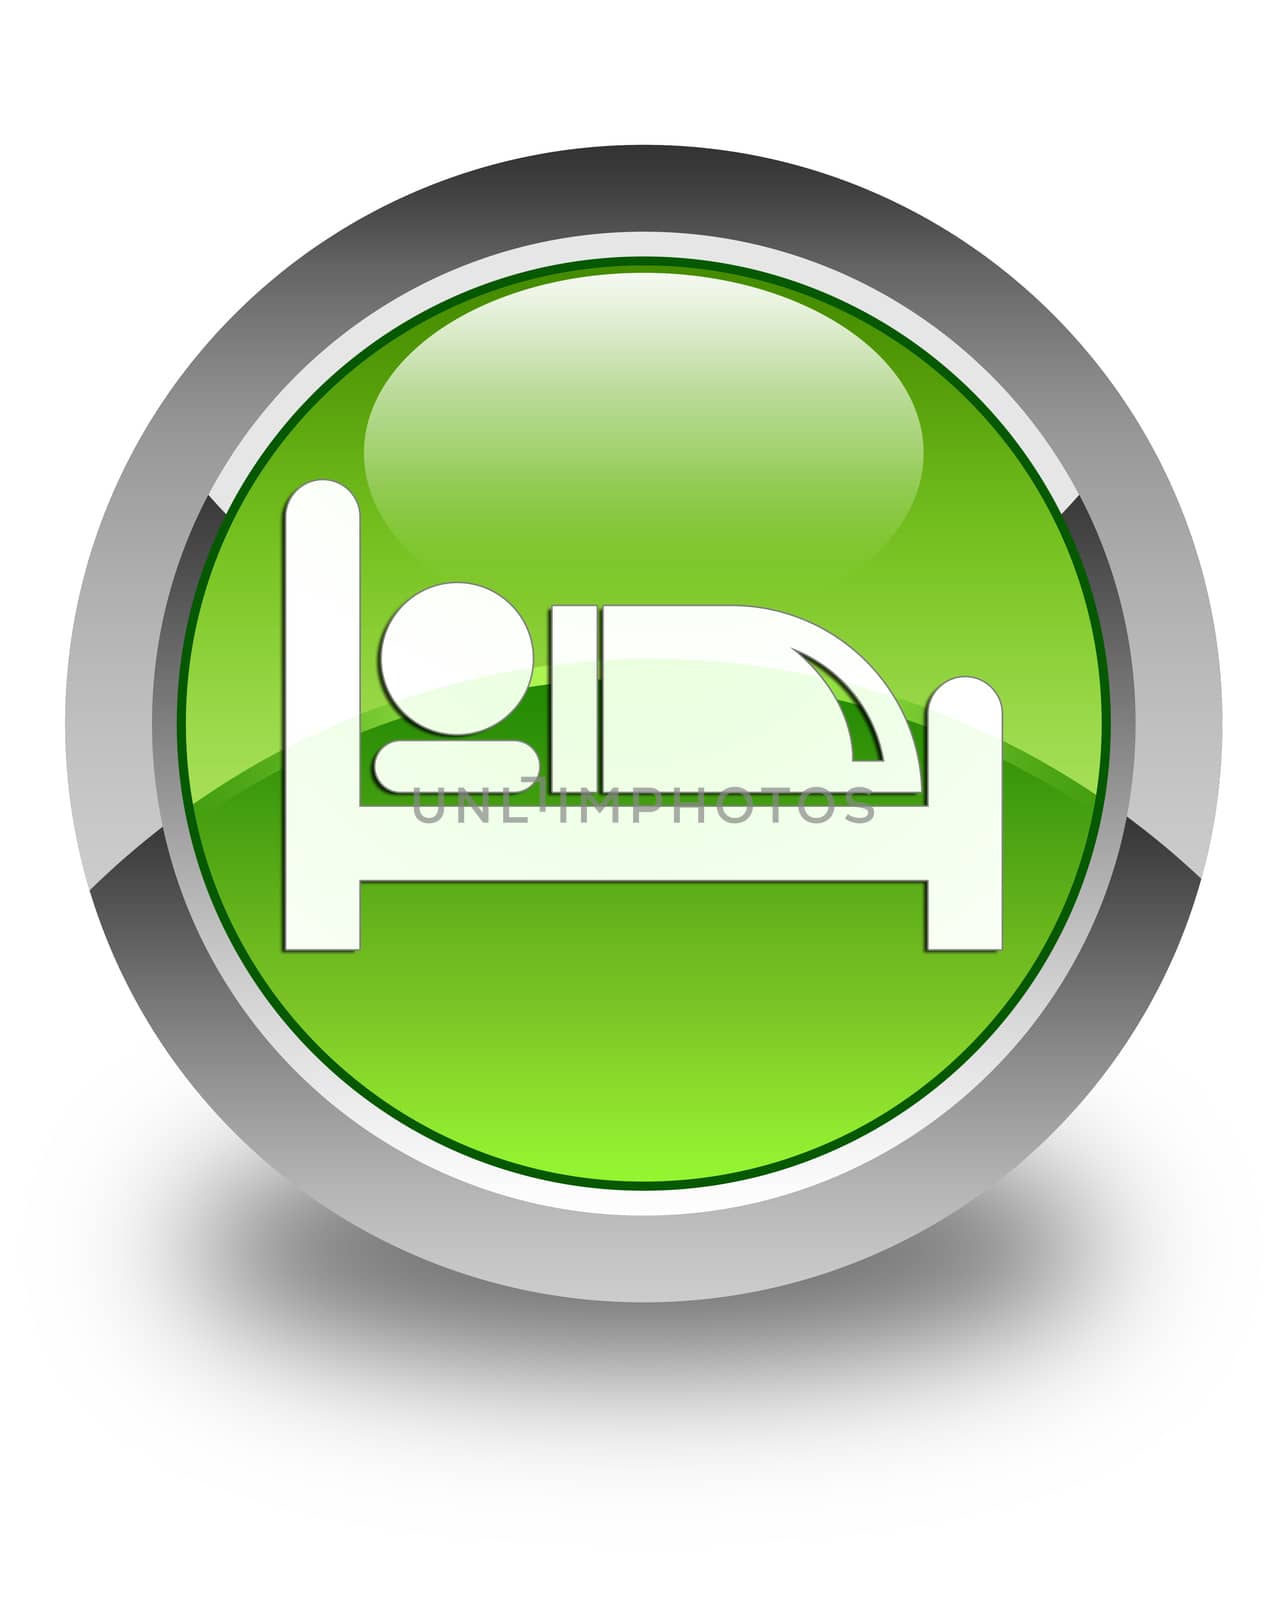 Hotel bed icon on glossy green round button